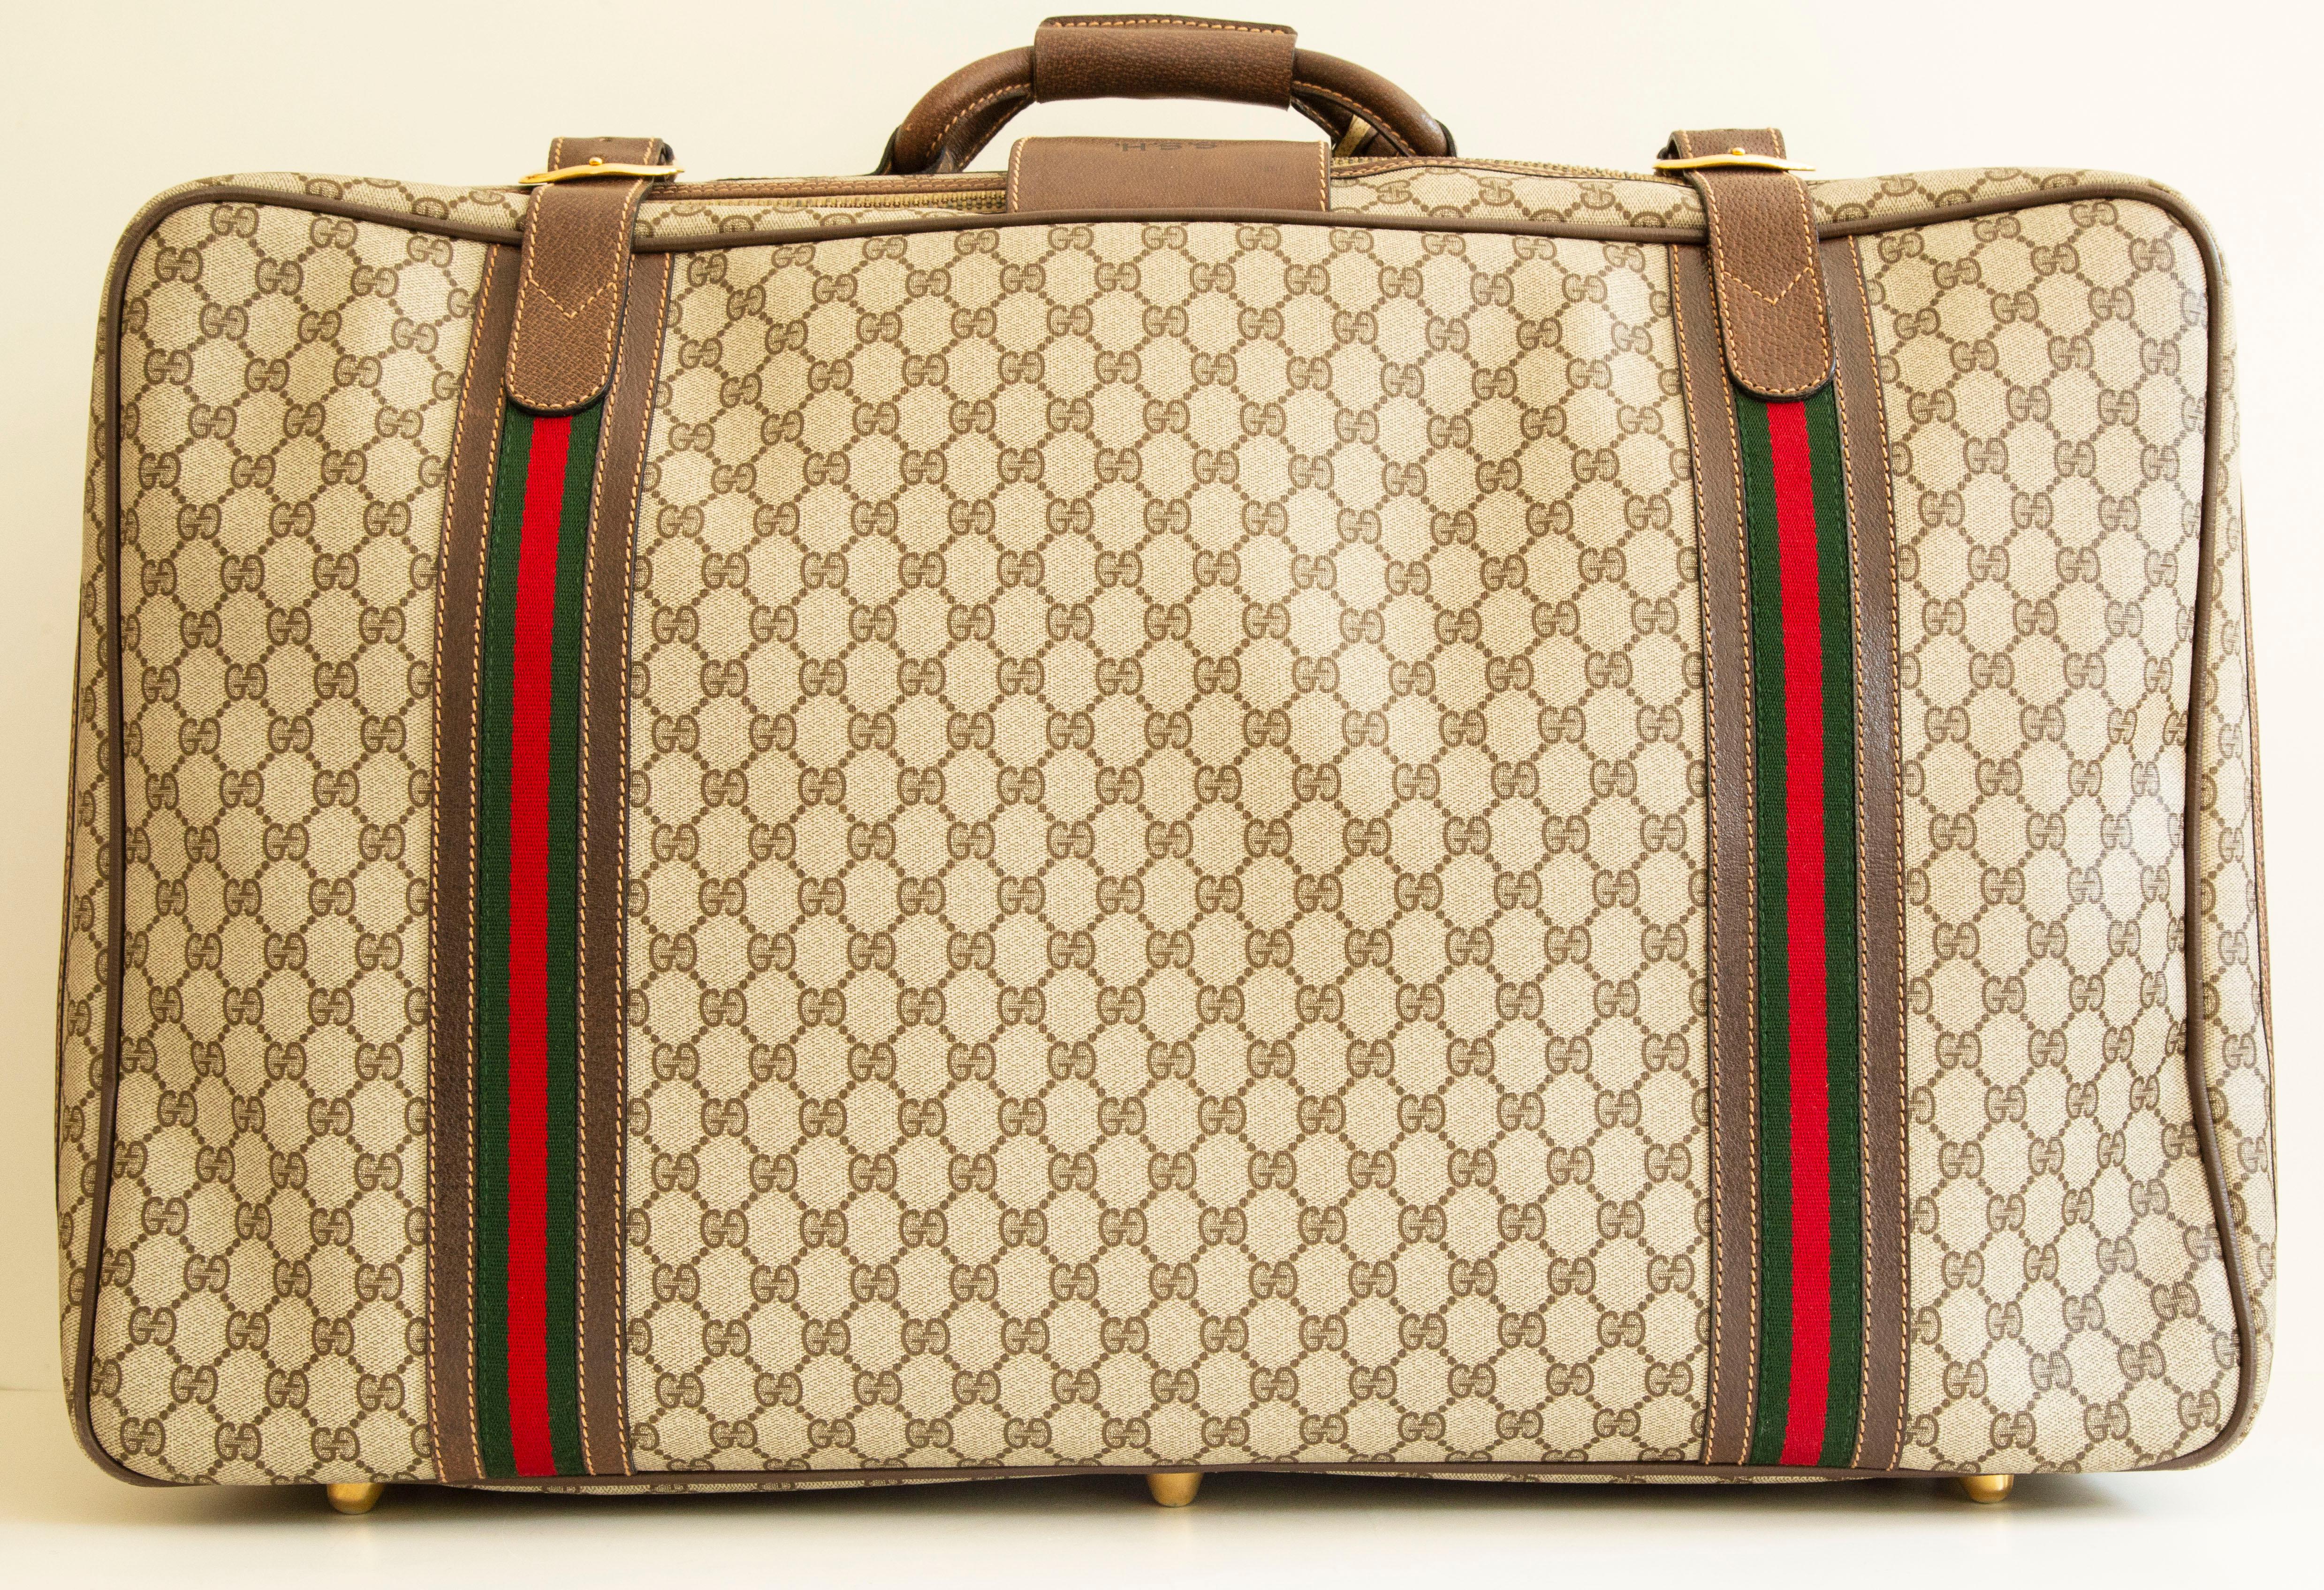 An authentic vintage large Gucci Suitcase. The suitcase features a classic GG canvas exterior, brown leather trim with Gucci racing stripes, and gold-toned hardware. The bag can be closed with a zipper and secured by brown leather straps, and a key